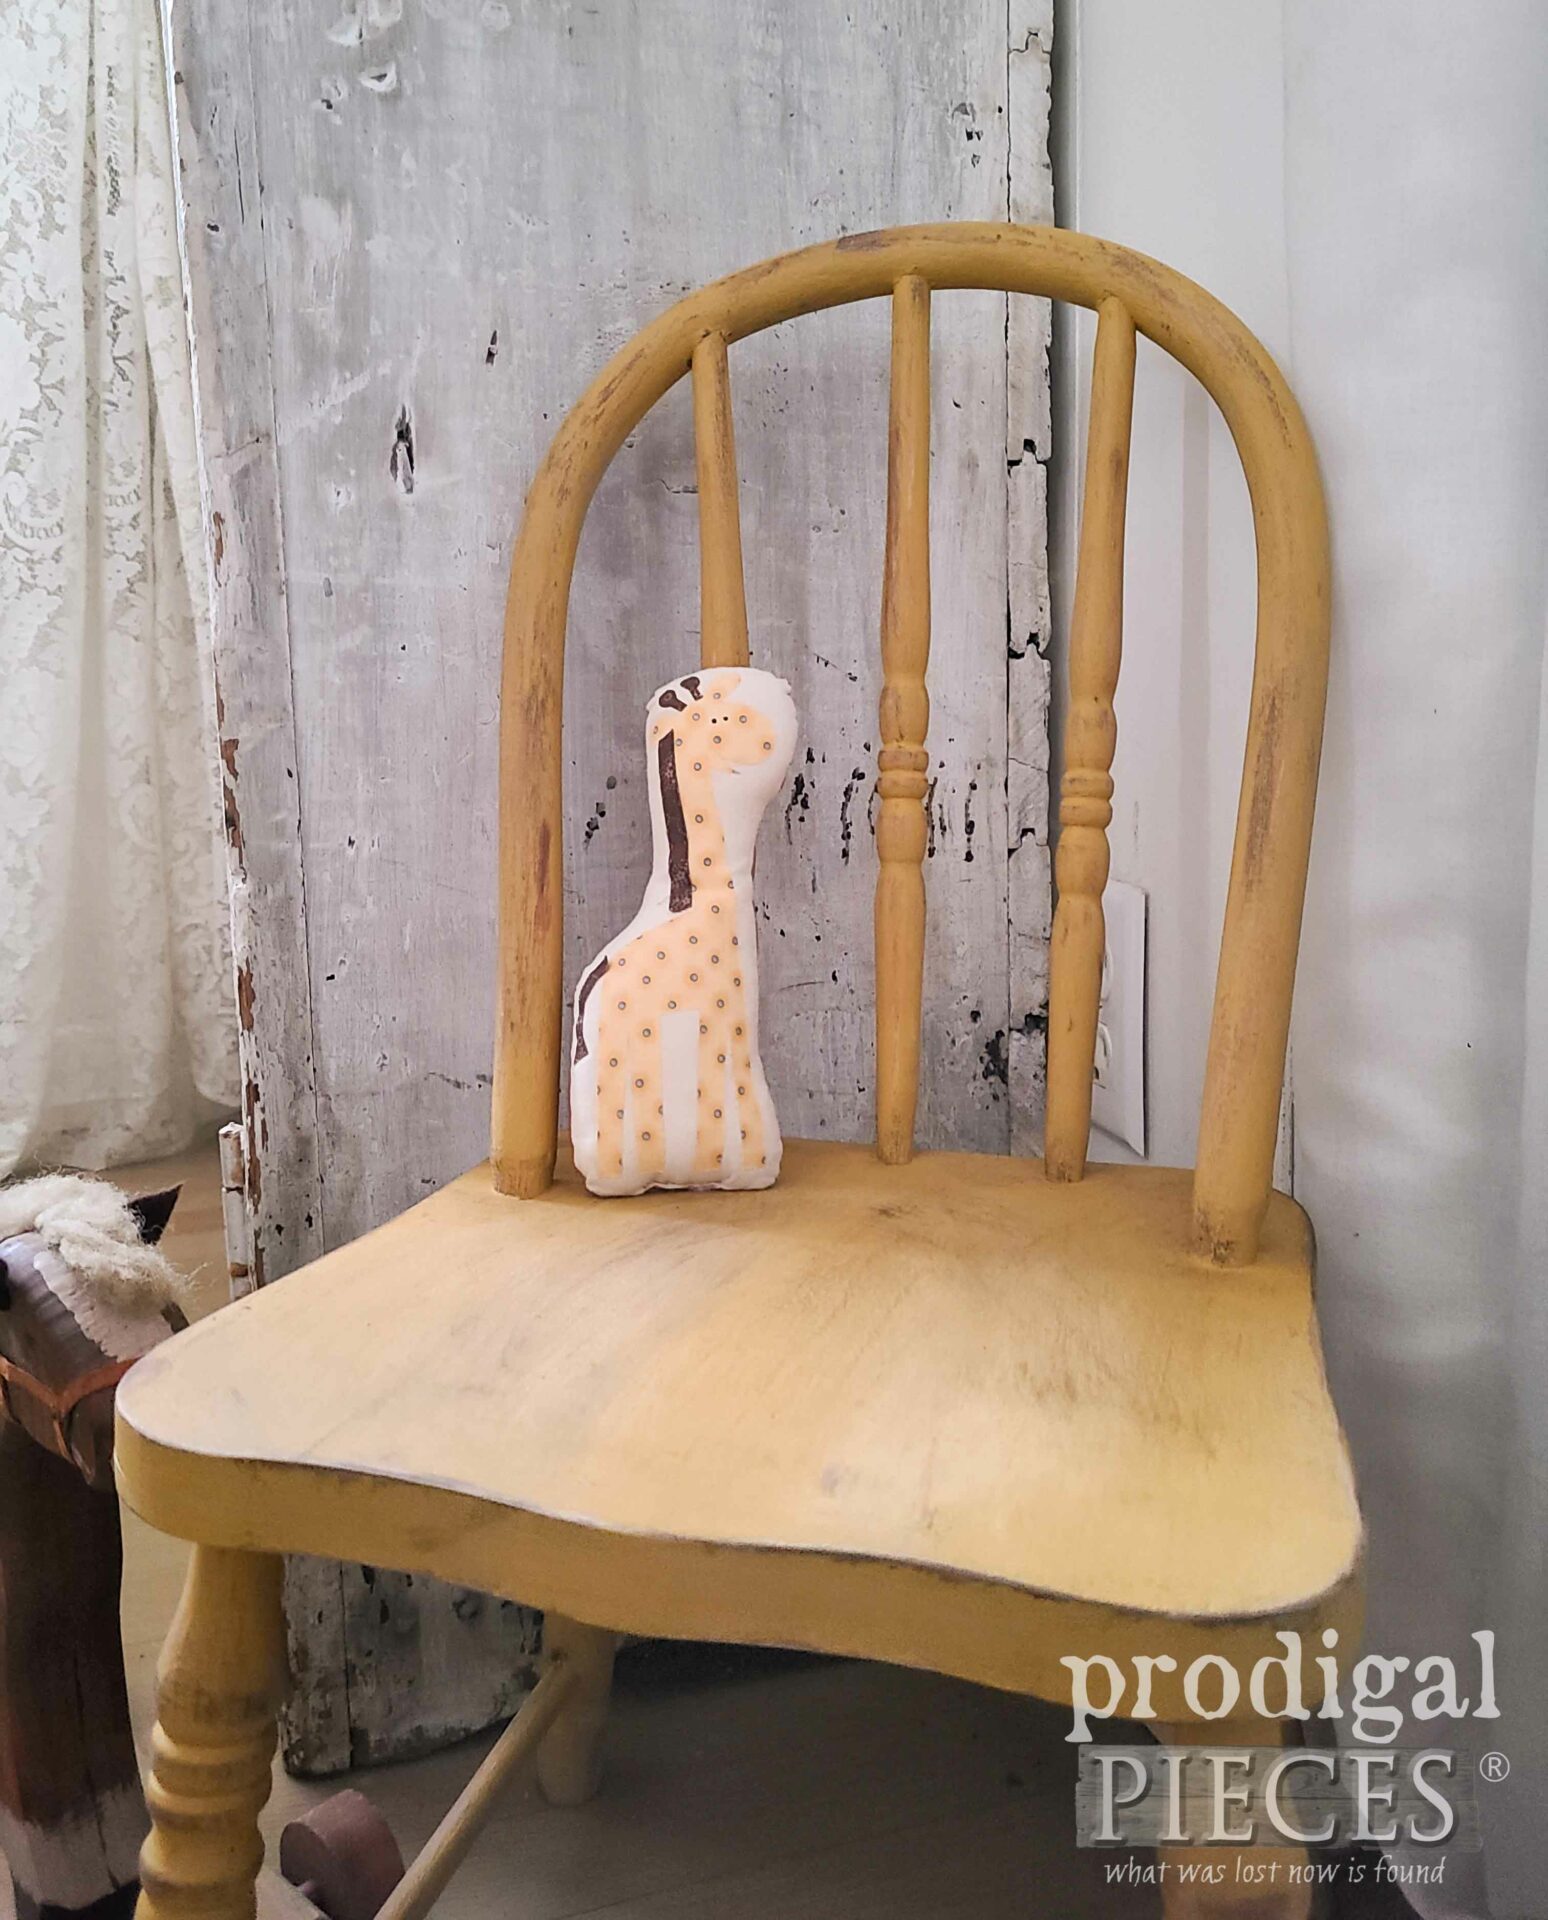 Distressed Yellow Windsor Chair by Larissa of Prodigal Pieces | Antique Child's Chairs | prodigalpieces.com #prodigalpieces #furniture #diy #antique